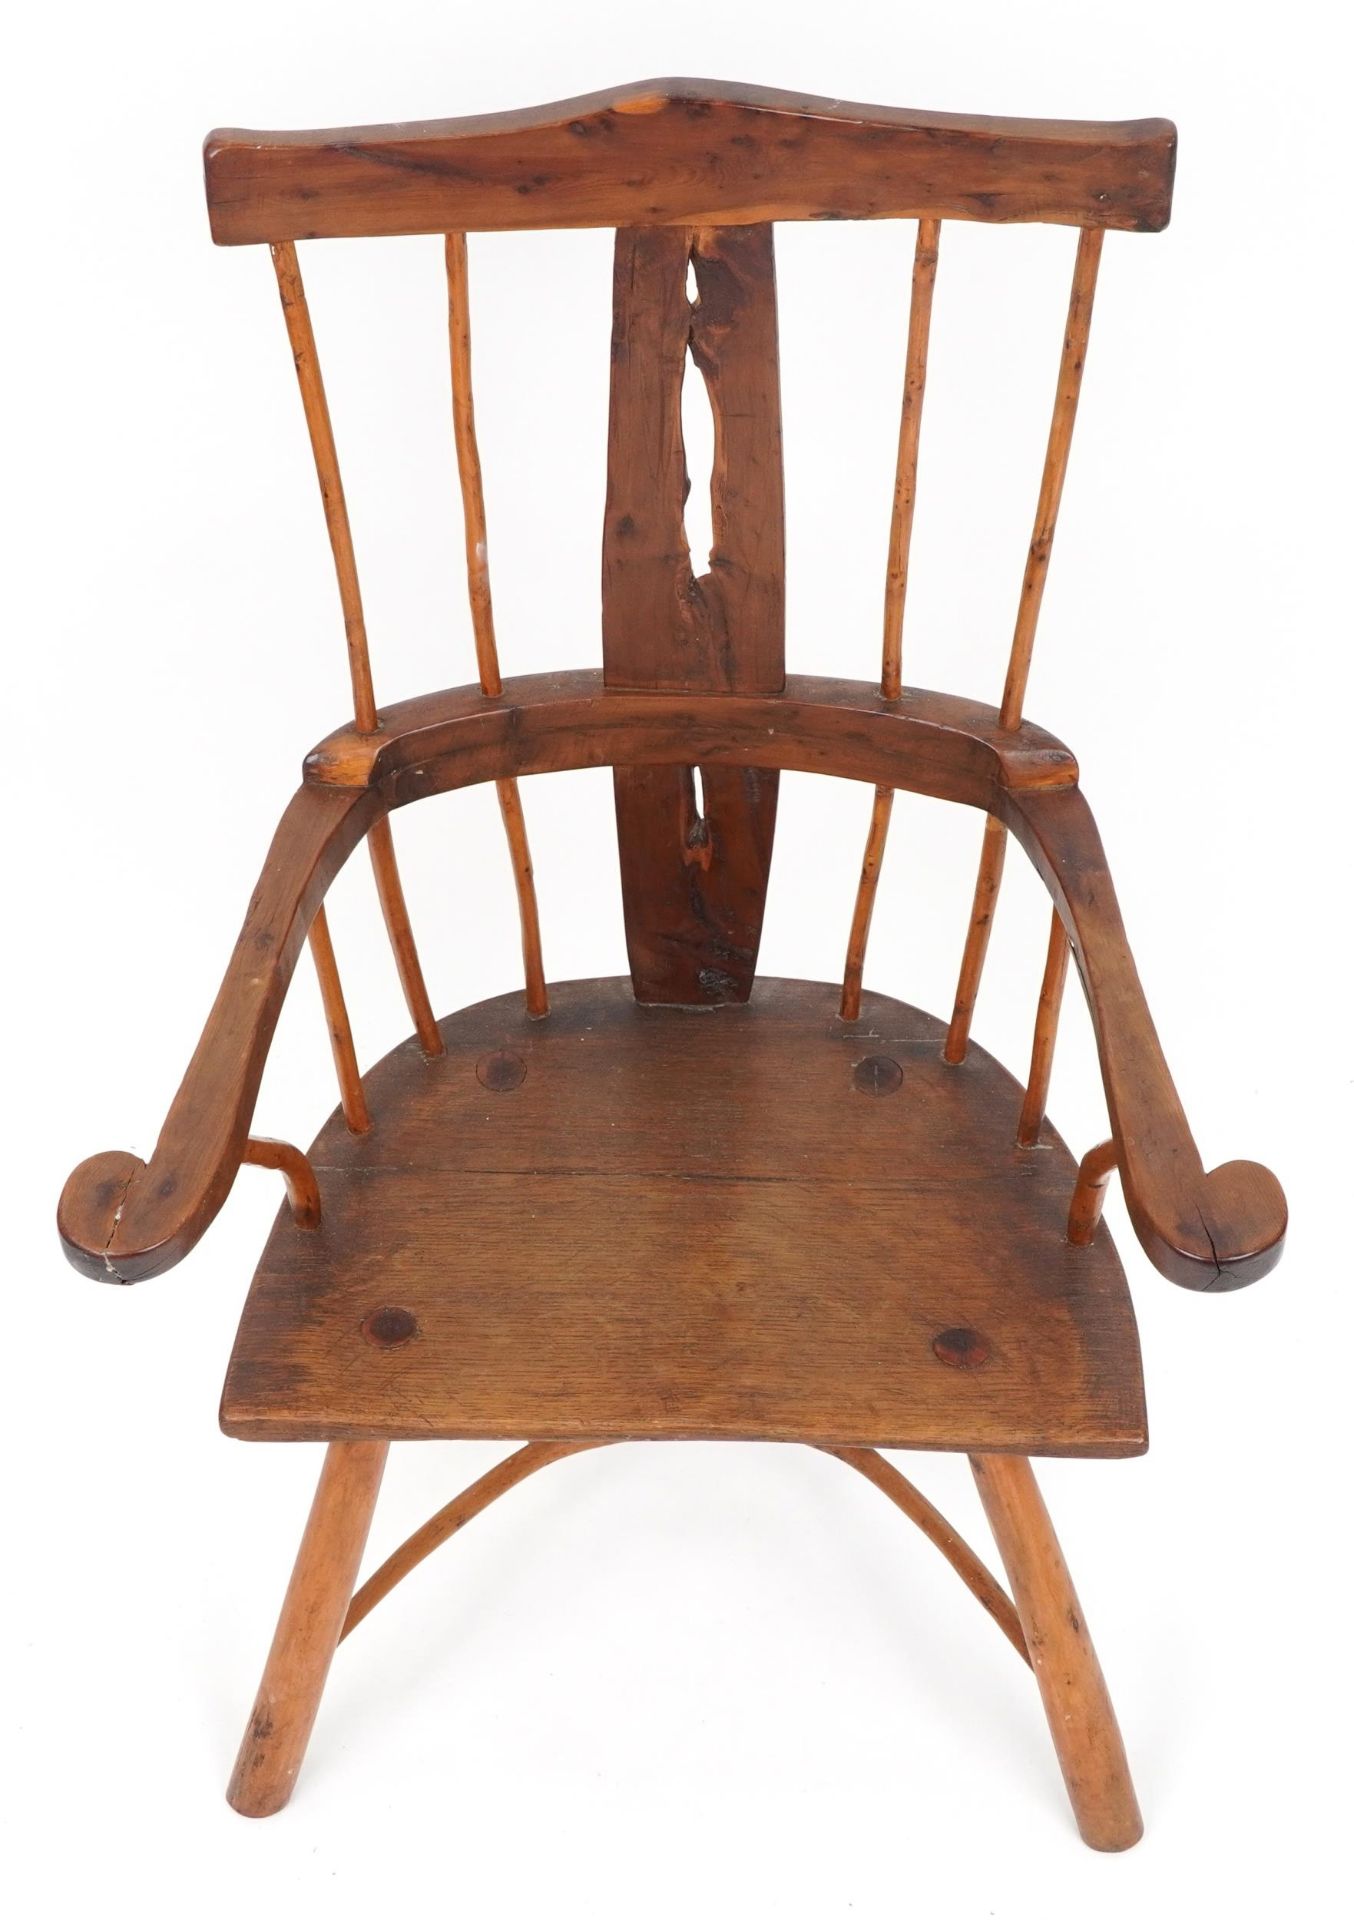 Antique country spindle back chair with pierced splat, 101cm high - Image 3 of 4